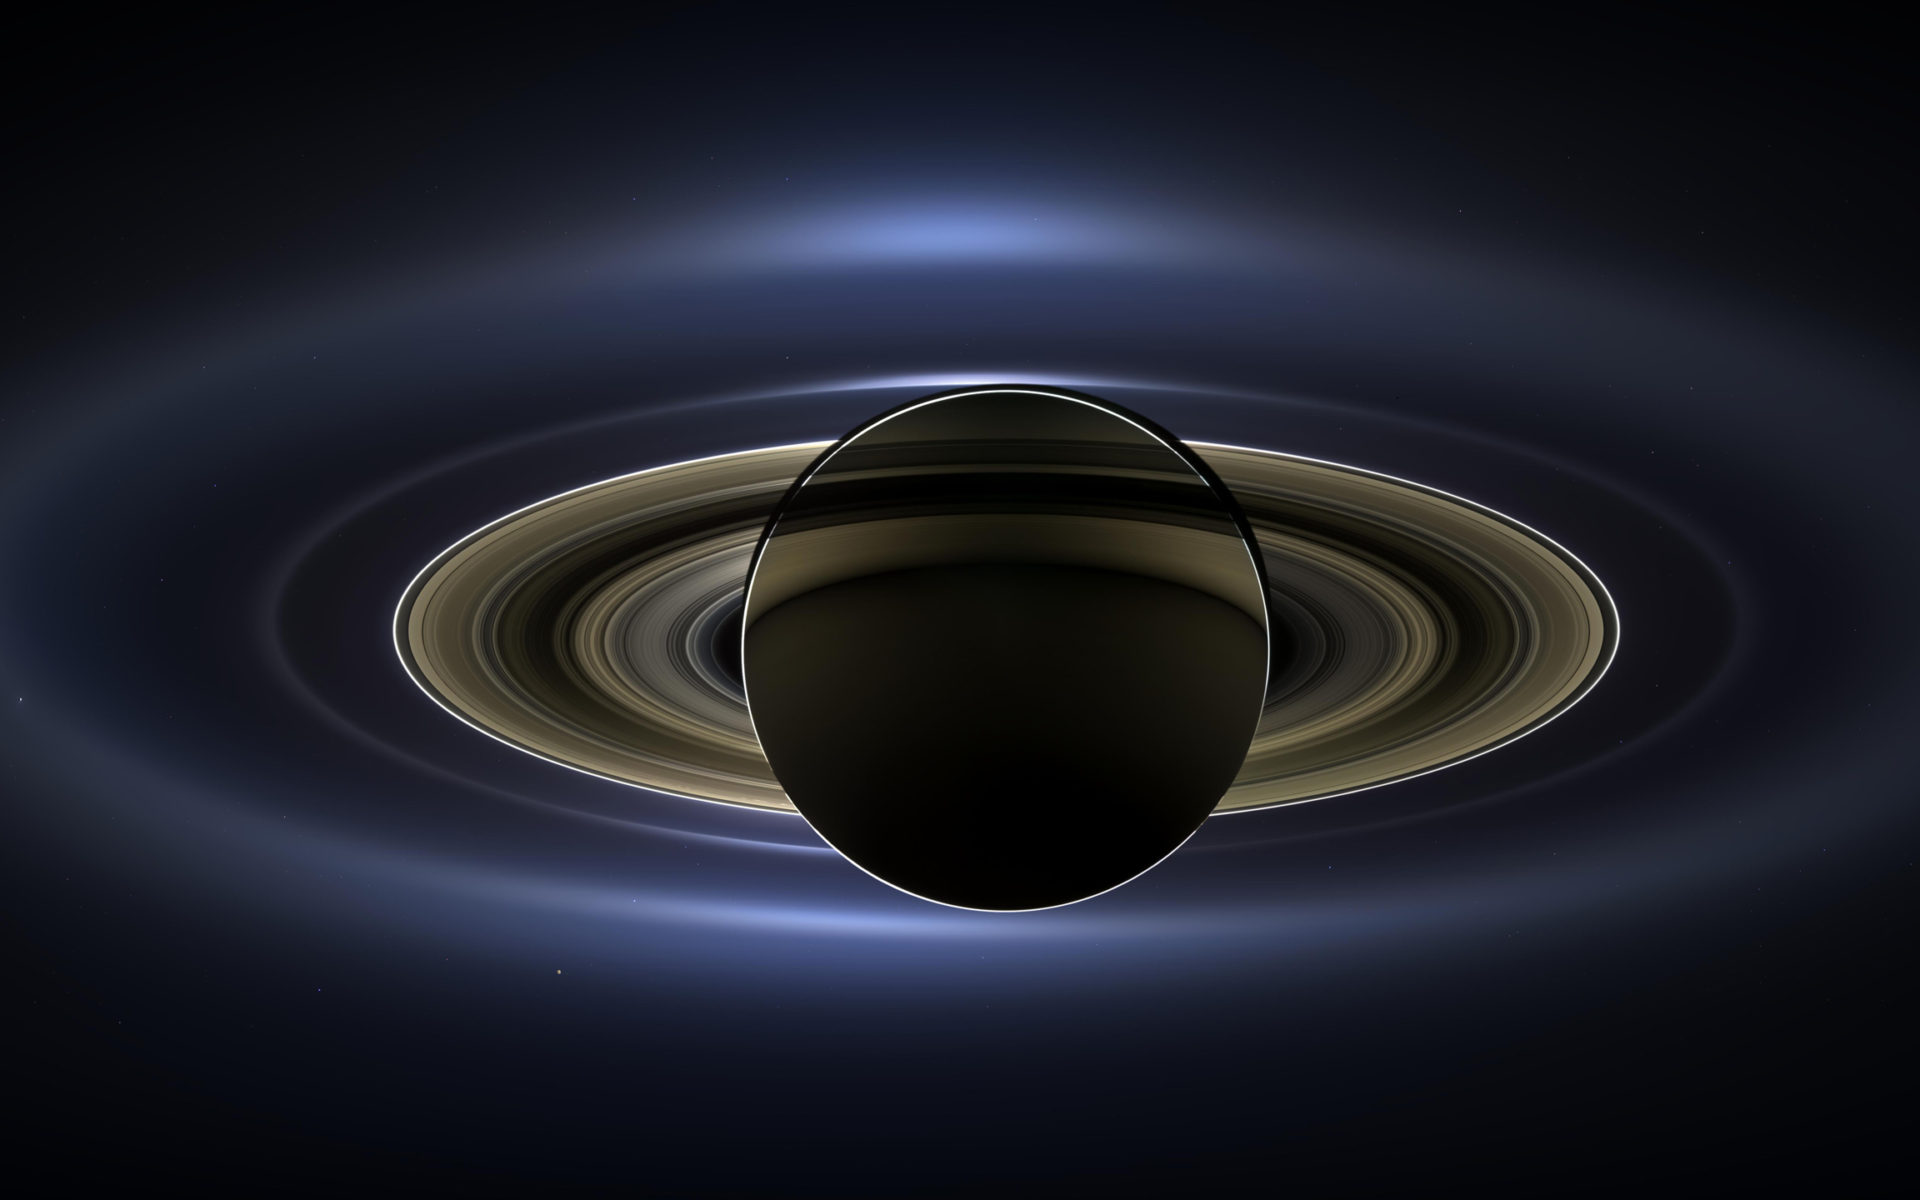 Saturn With Its Rings Wallpaper HD 97 354 : Wallpaper13.com